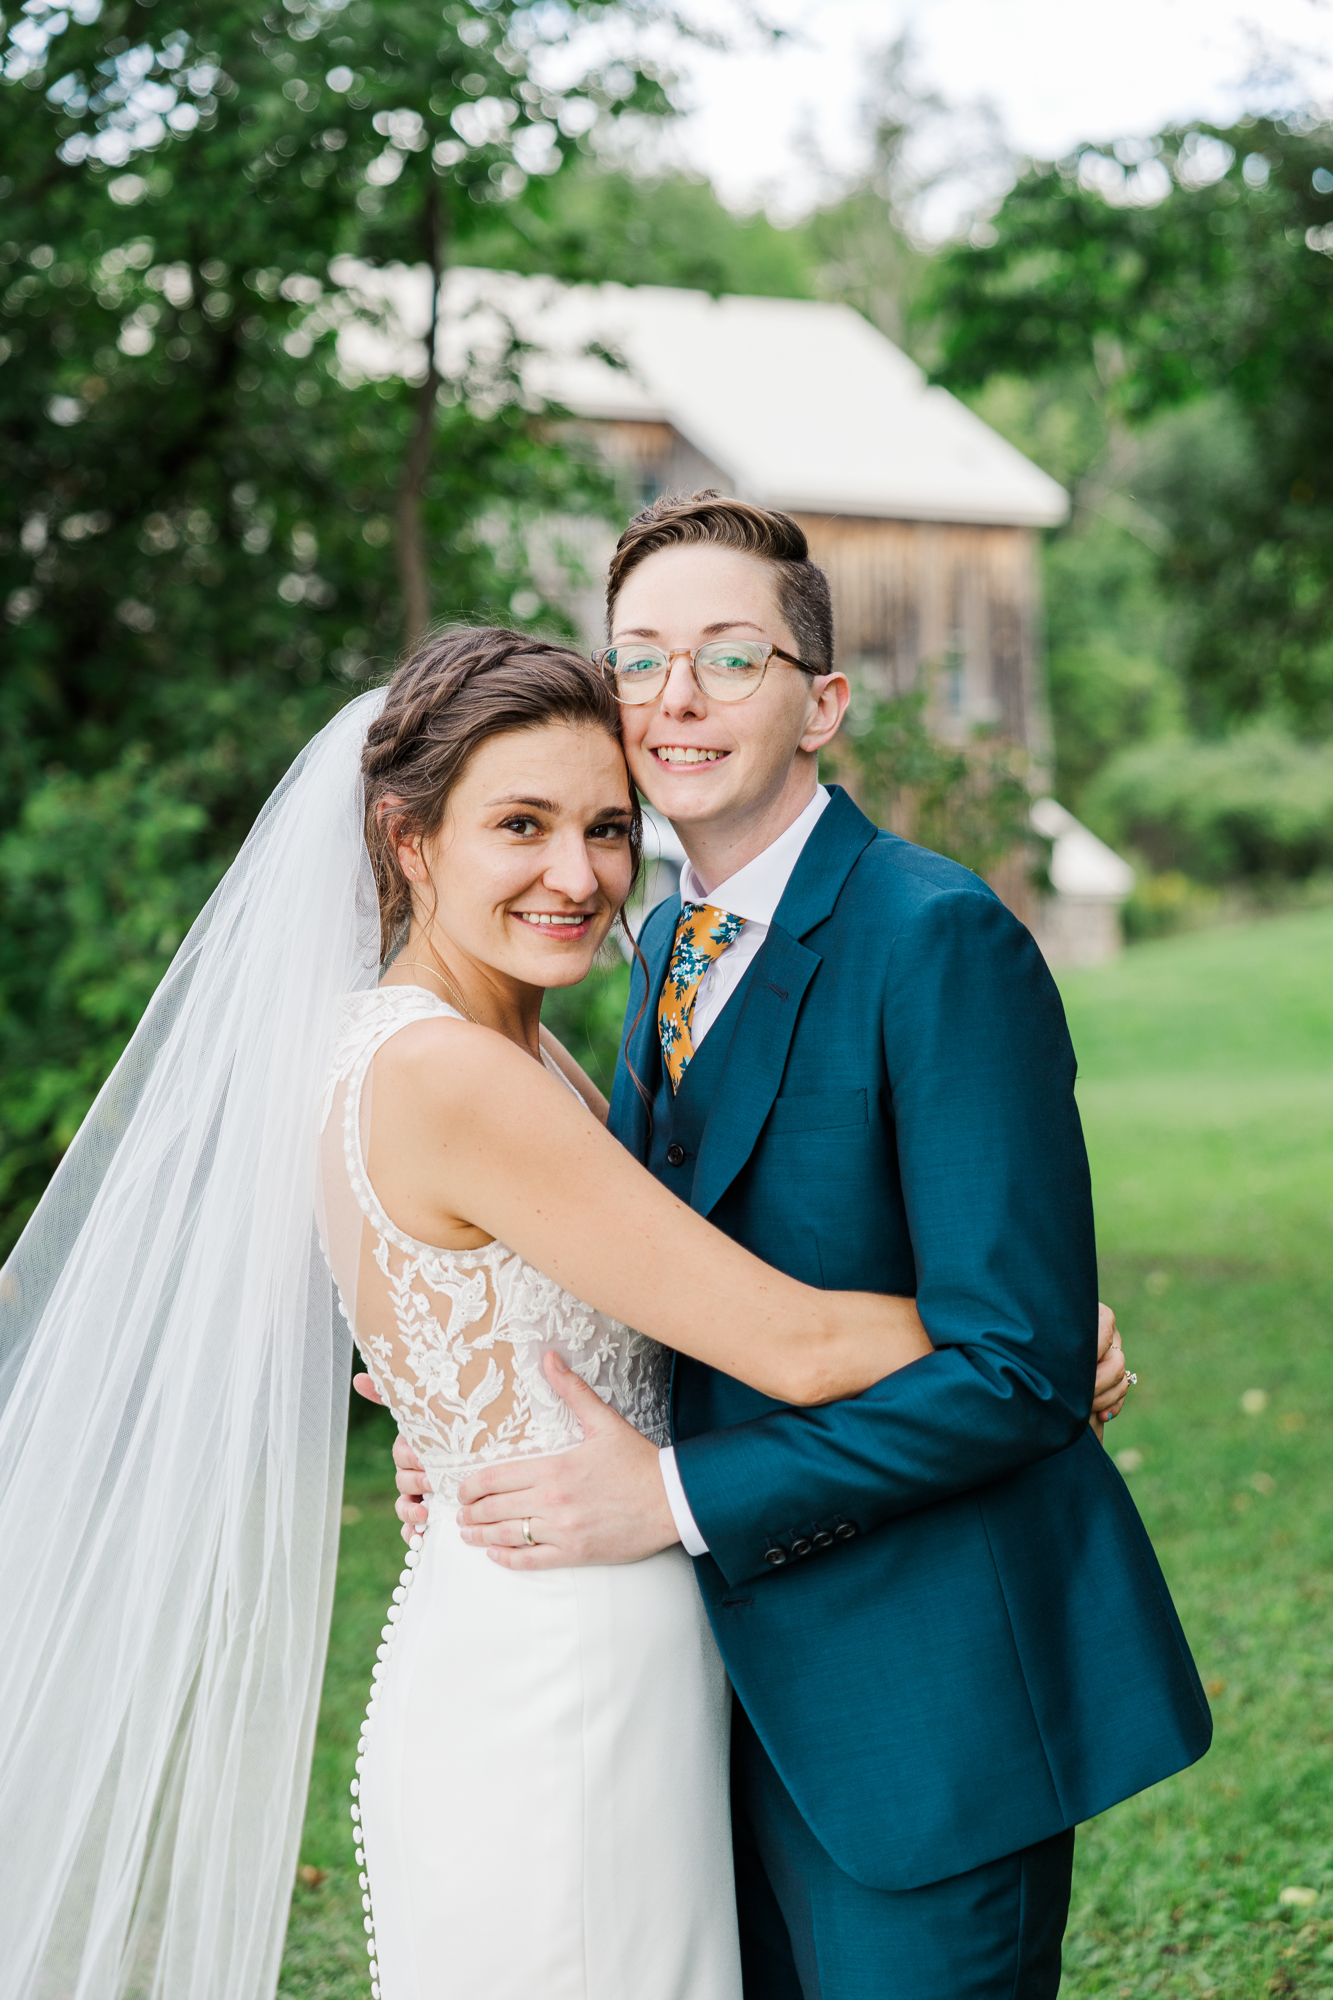 Jaw-dropping Upstate Wedding Photos at Cristman Barn in Ilion, New York